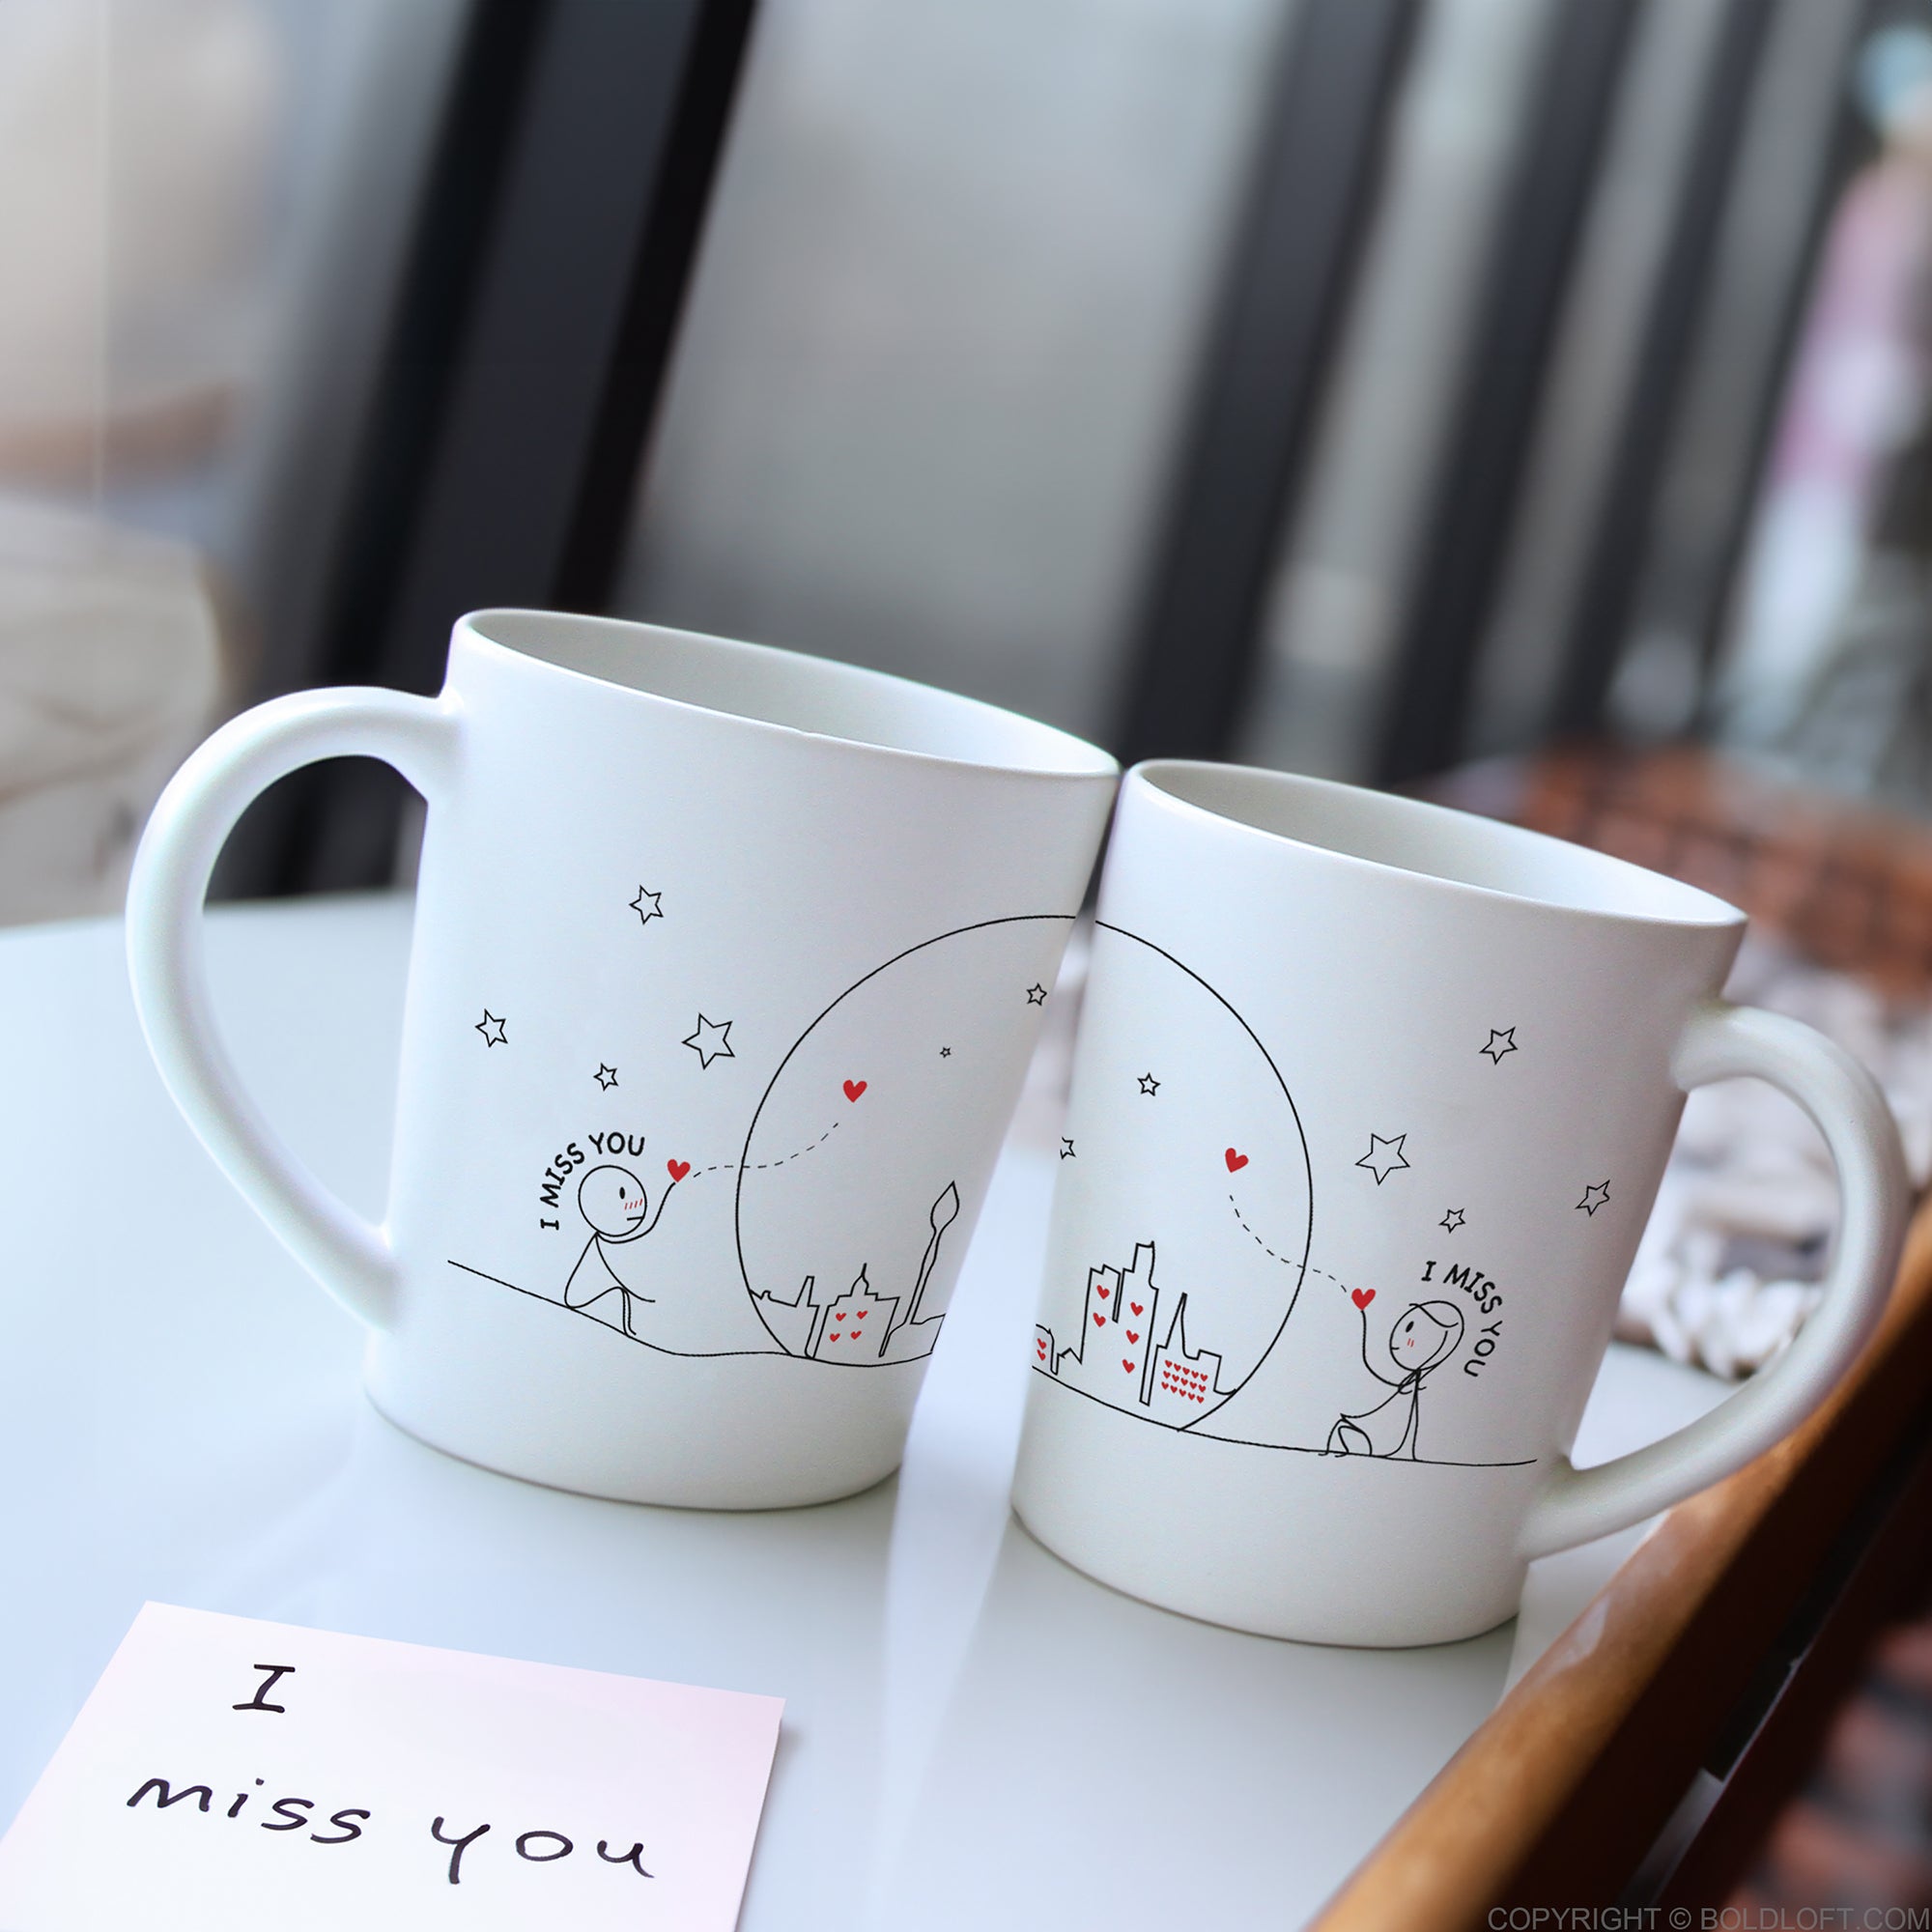 15 Long Distance Relationship Gift Ideas - The Jenna Way